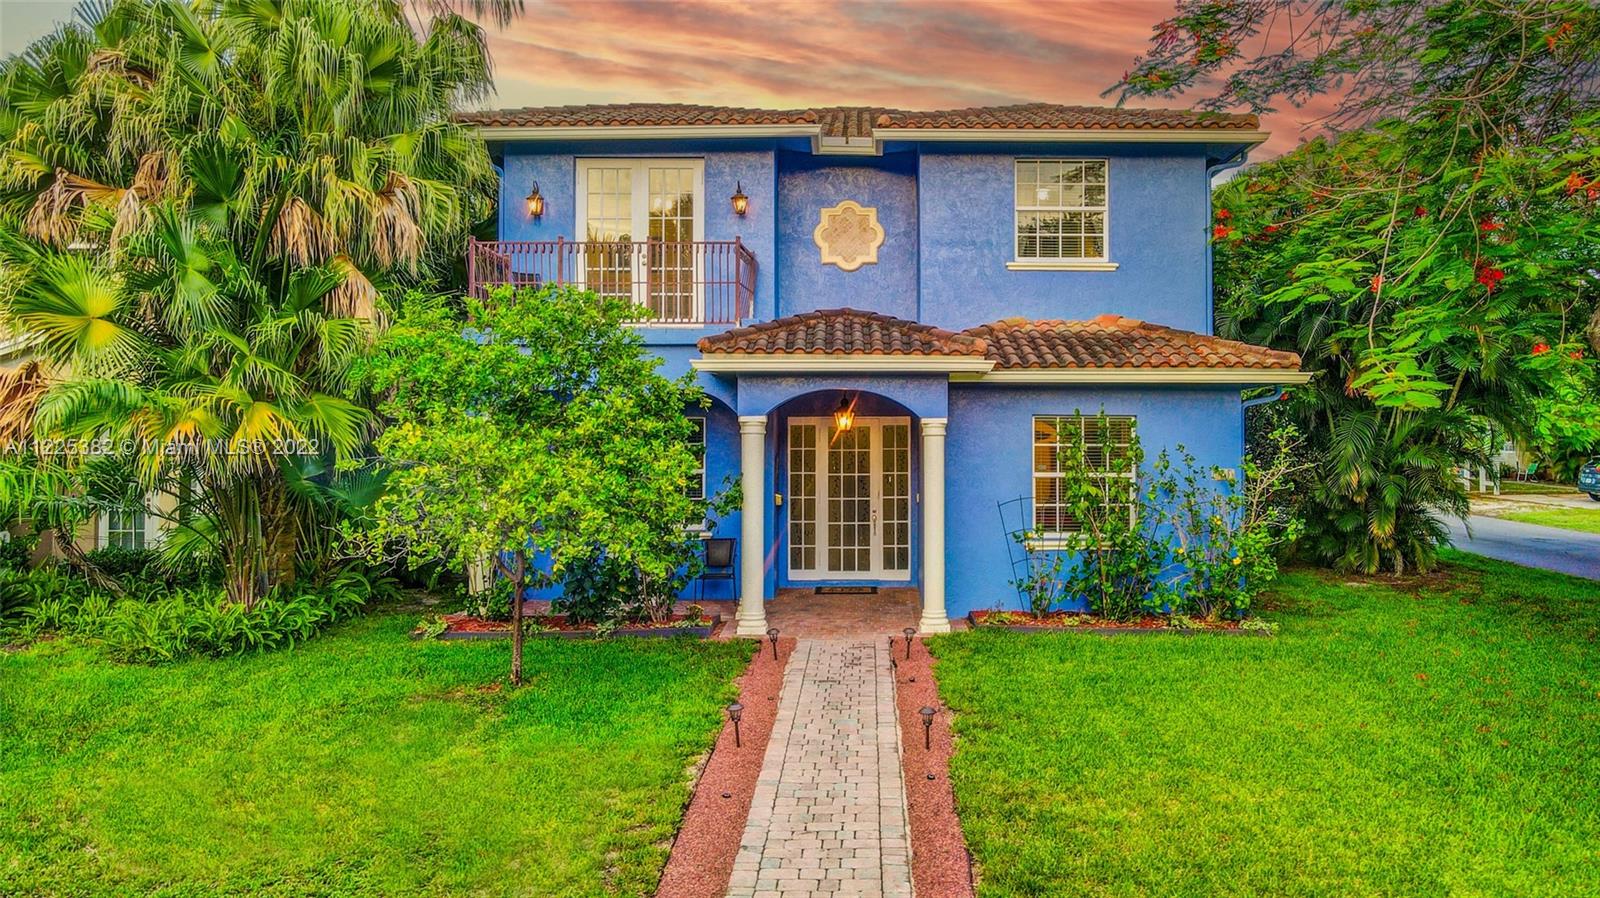 Located in the Fort Lauderdale’s prized neighborhood Victoria Park, this home is conveniently located just minutes away from top restaurants, beaches, Las Olas nightlife, and more! This one of a kind home boats 5 bedrooms, 4 bathrooms, office room, entertainment room, 10 foot high ceilings, balcony, marble flooring, a two car garage, and over 3,000 square feet of living space. Unwind in your personal backyard resort featuring an in-ground pool, wet bar, grill, and lounge area.